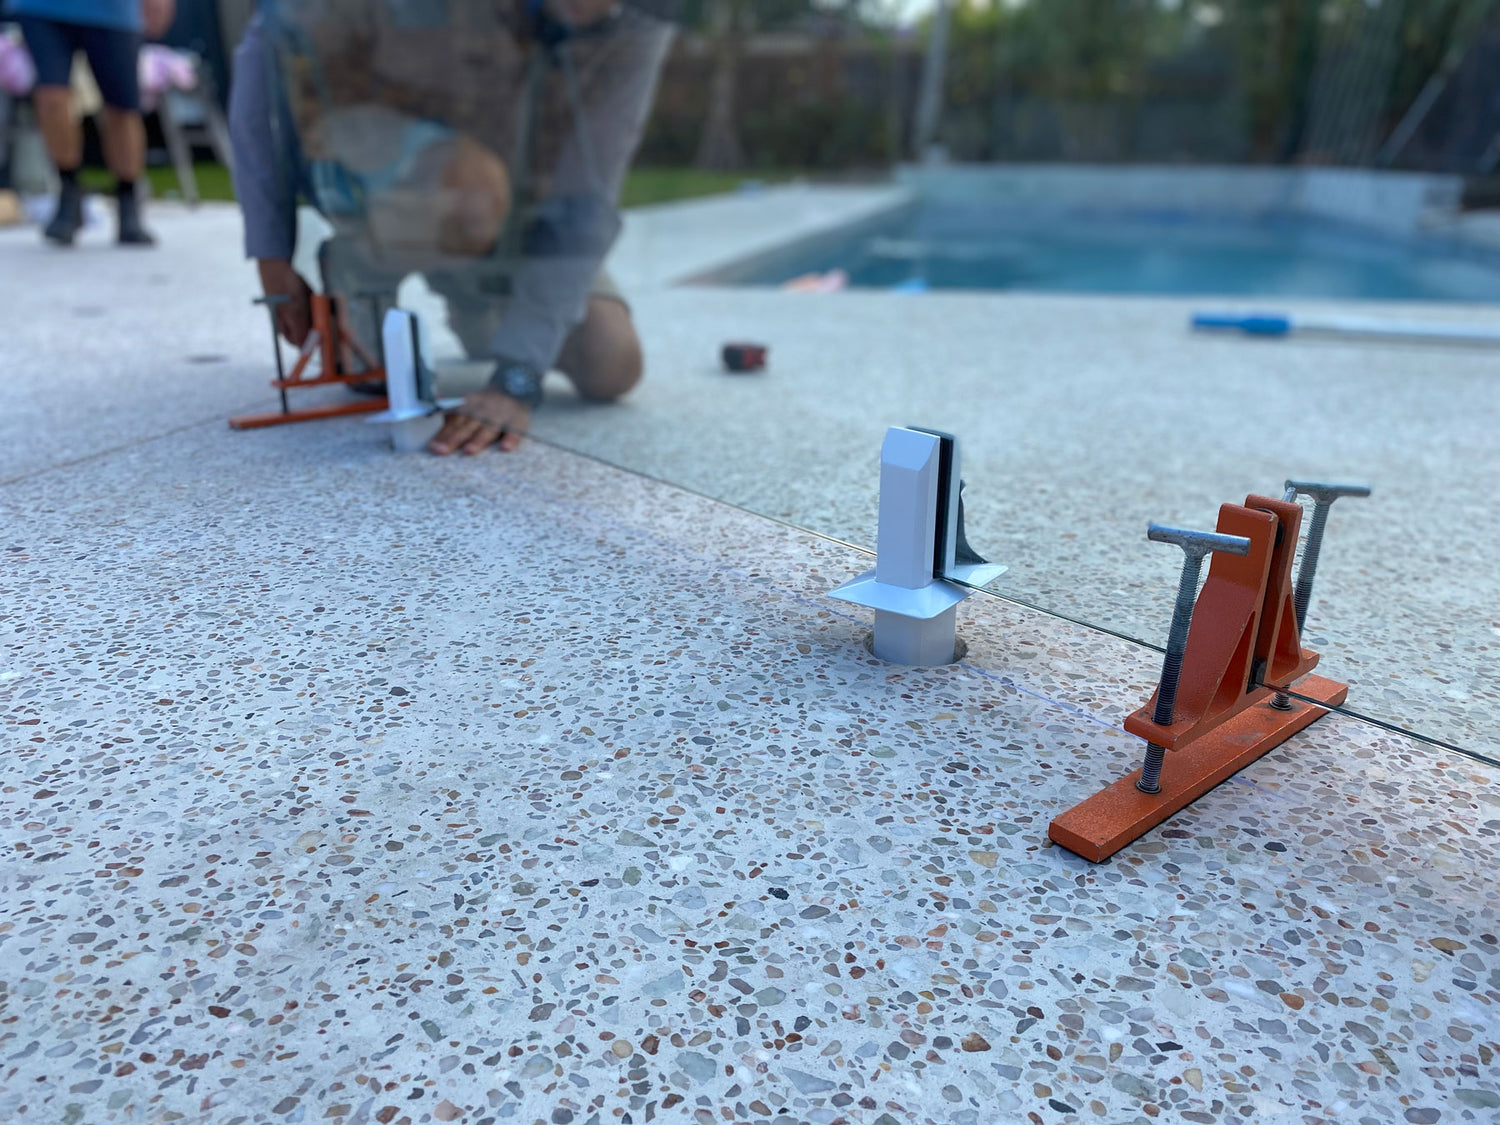 GlassMate tool supports the glass and then can be easily adjusted to ensure the glass is level, plumb and perfectly aligned with other panels before setting spigots into concrete